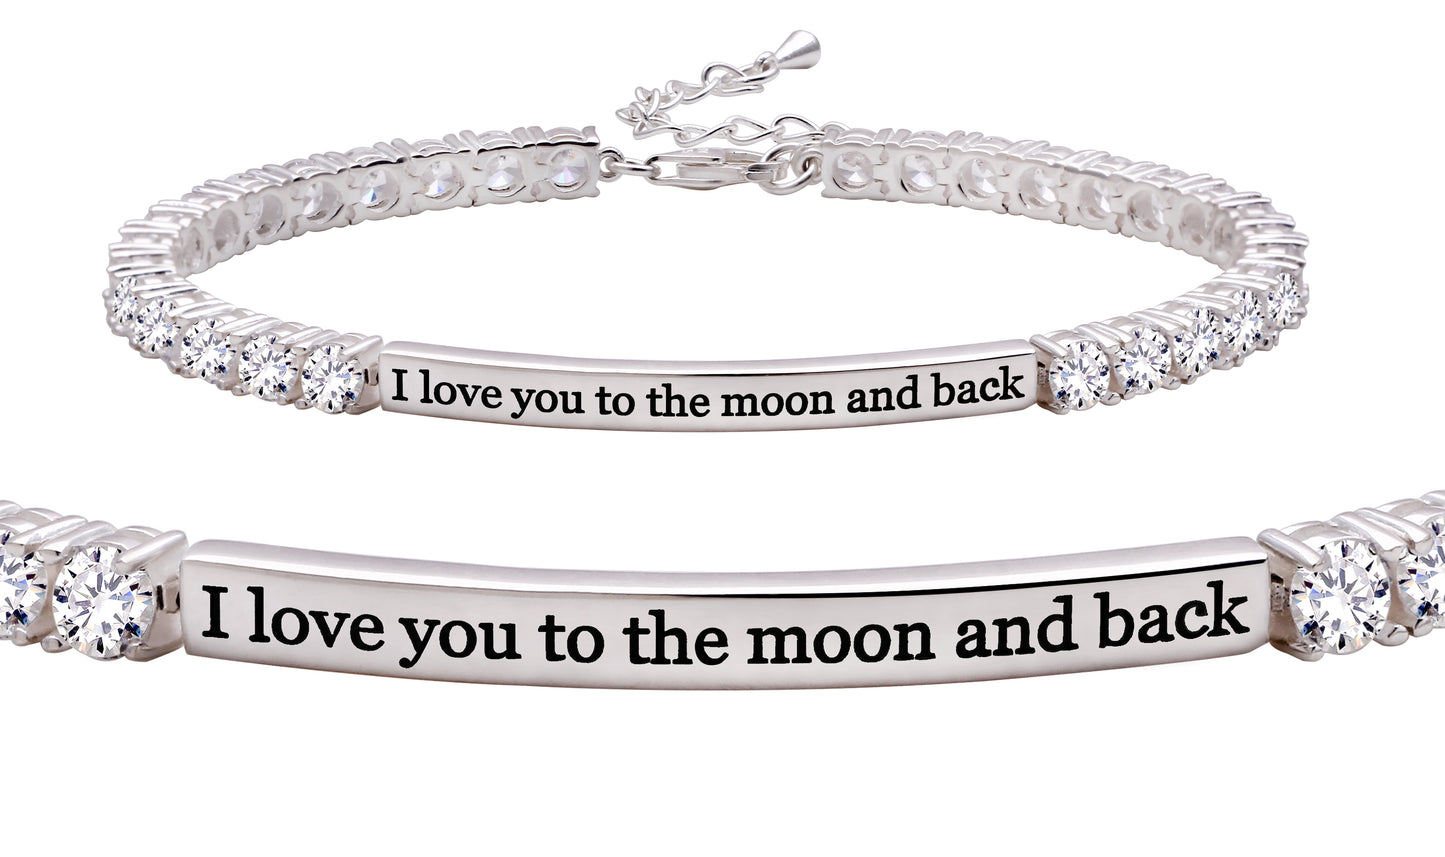 ALOV Jewelry Sterling Silver "I love you to the moon and back" 4mm Cubic Zirconia Tennis Bracelet